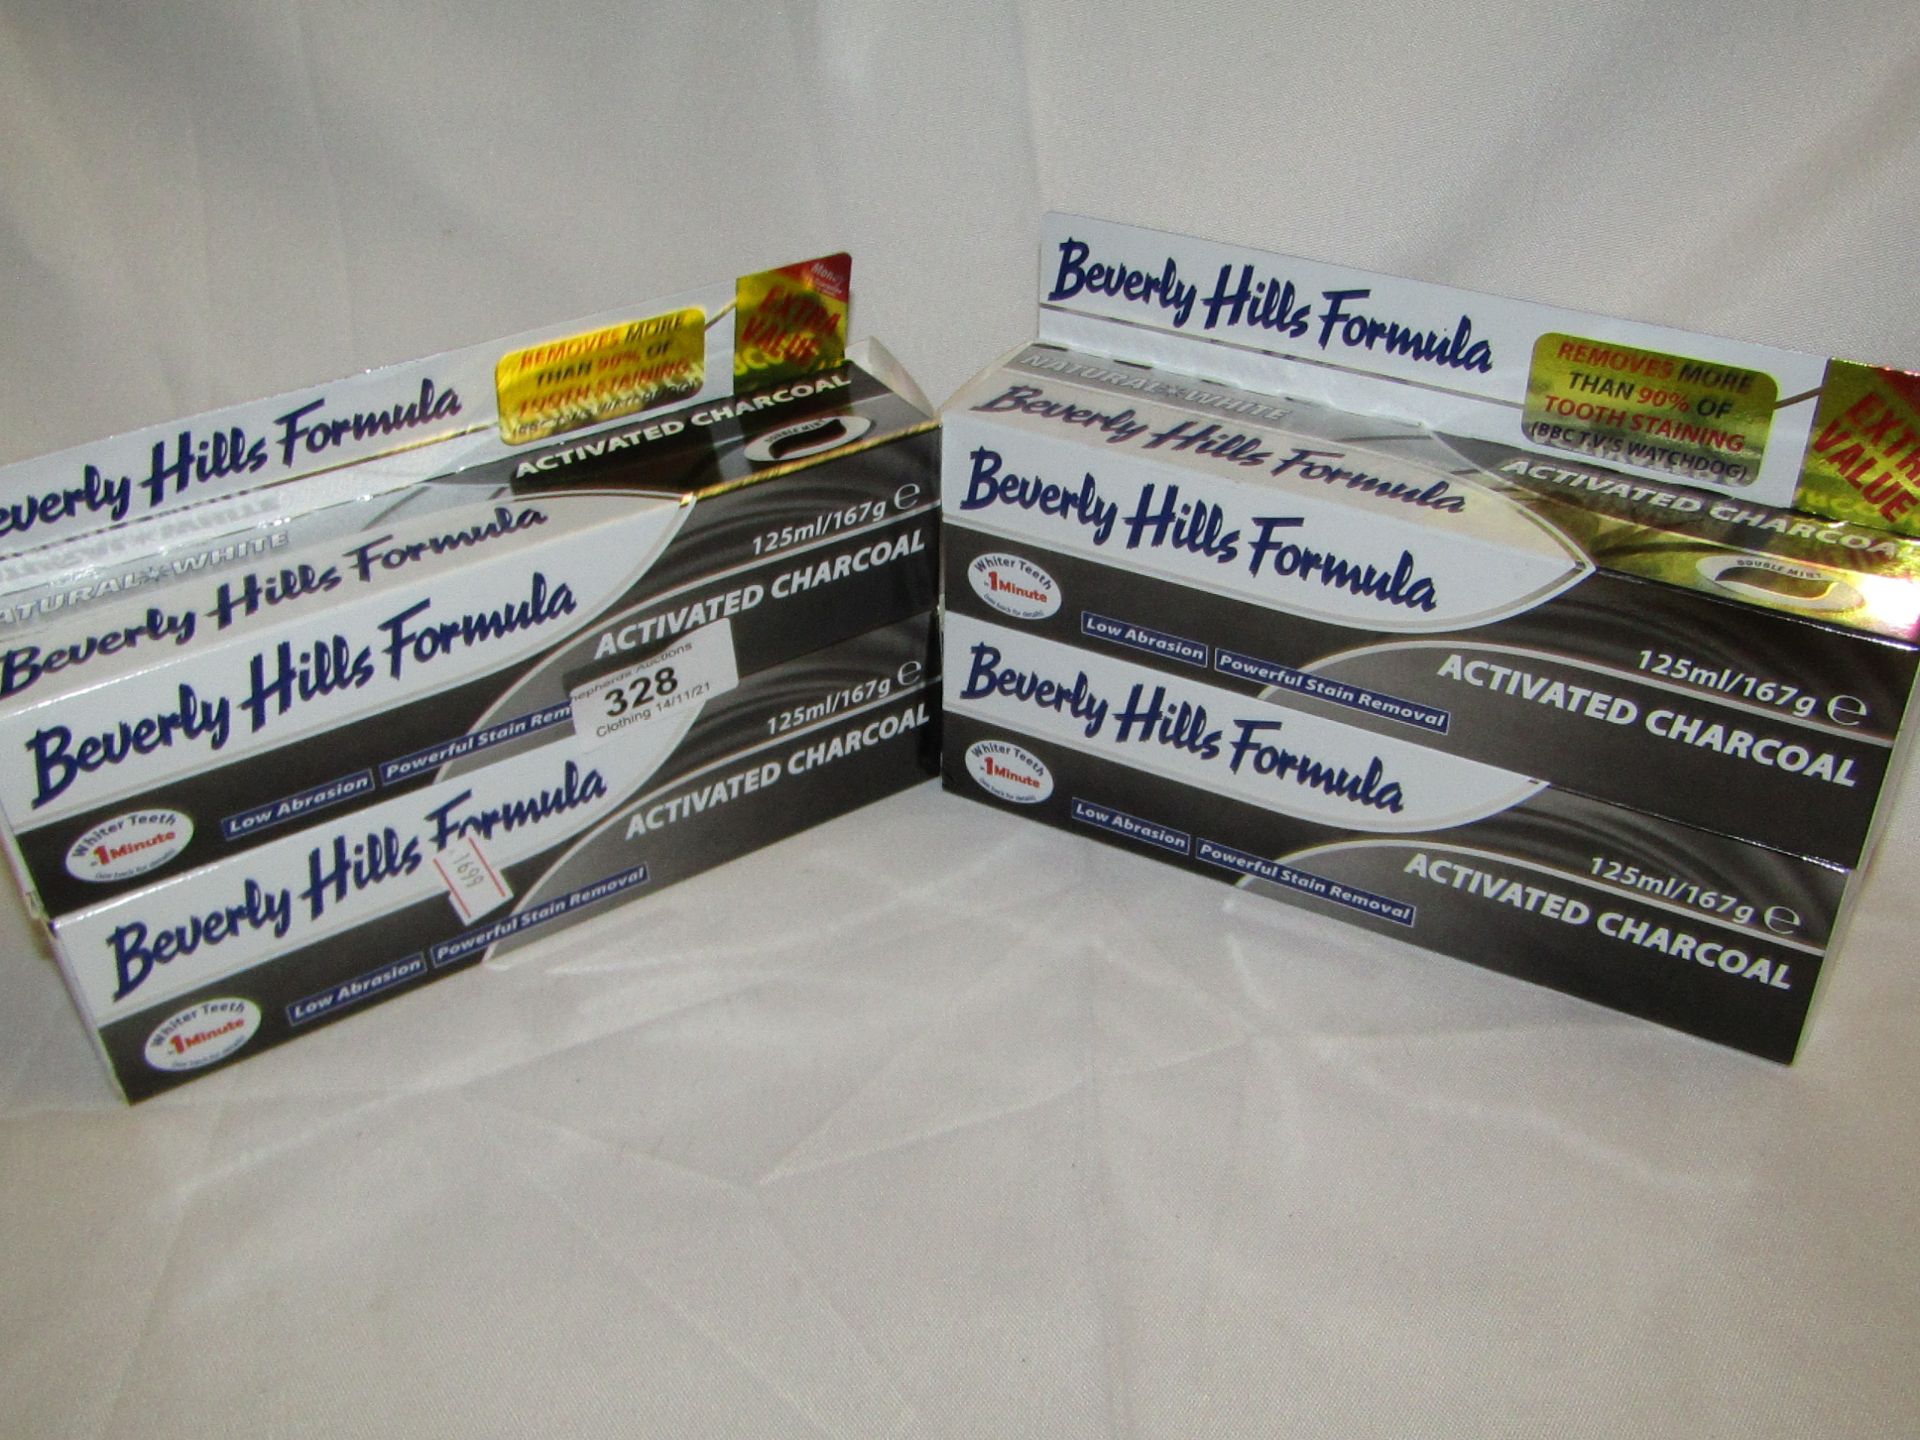 4 X Beverly Hills Formula Toothpaste,125 MLS Activated Charcoal New & Packaged